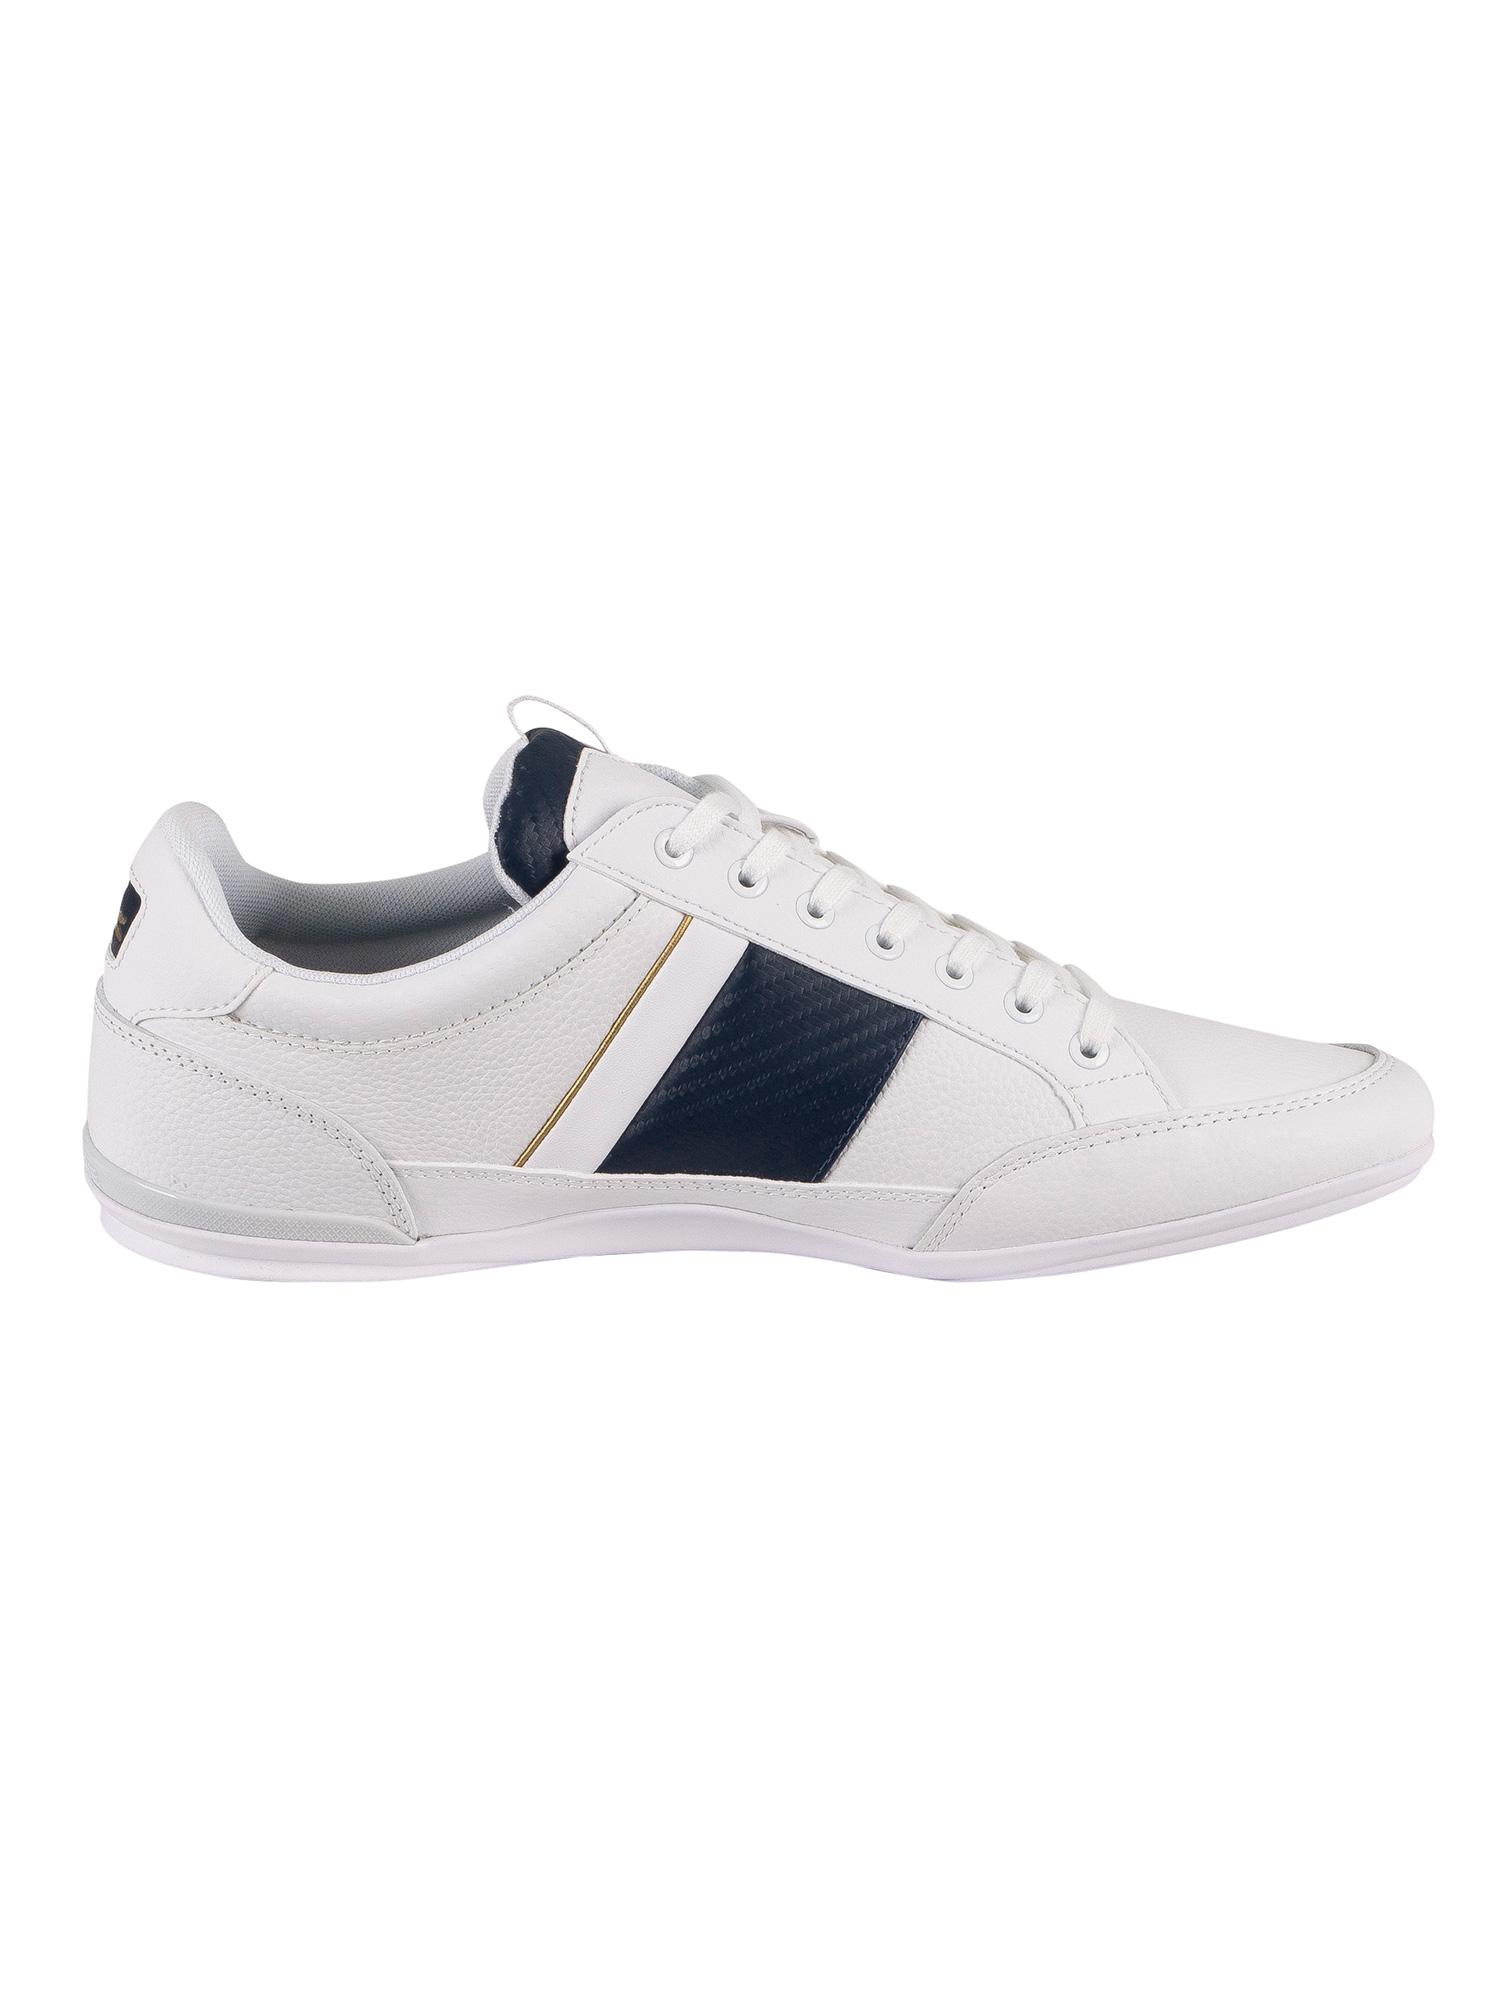 Lacoste Chaymon 0120 1 Cma Leather Trainers in White/White (White) for ...